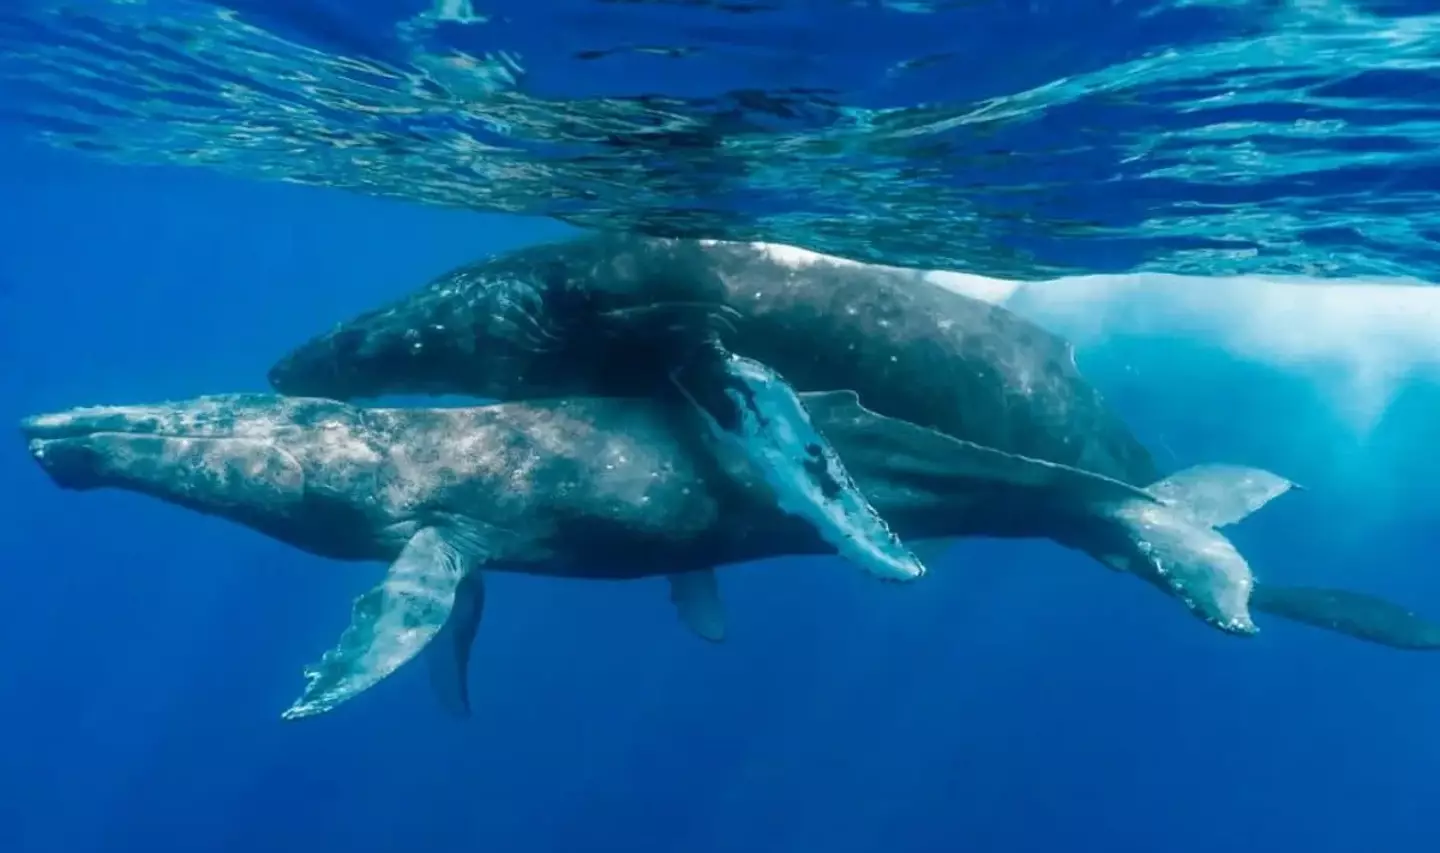 The two whales were photographed in the act.